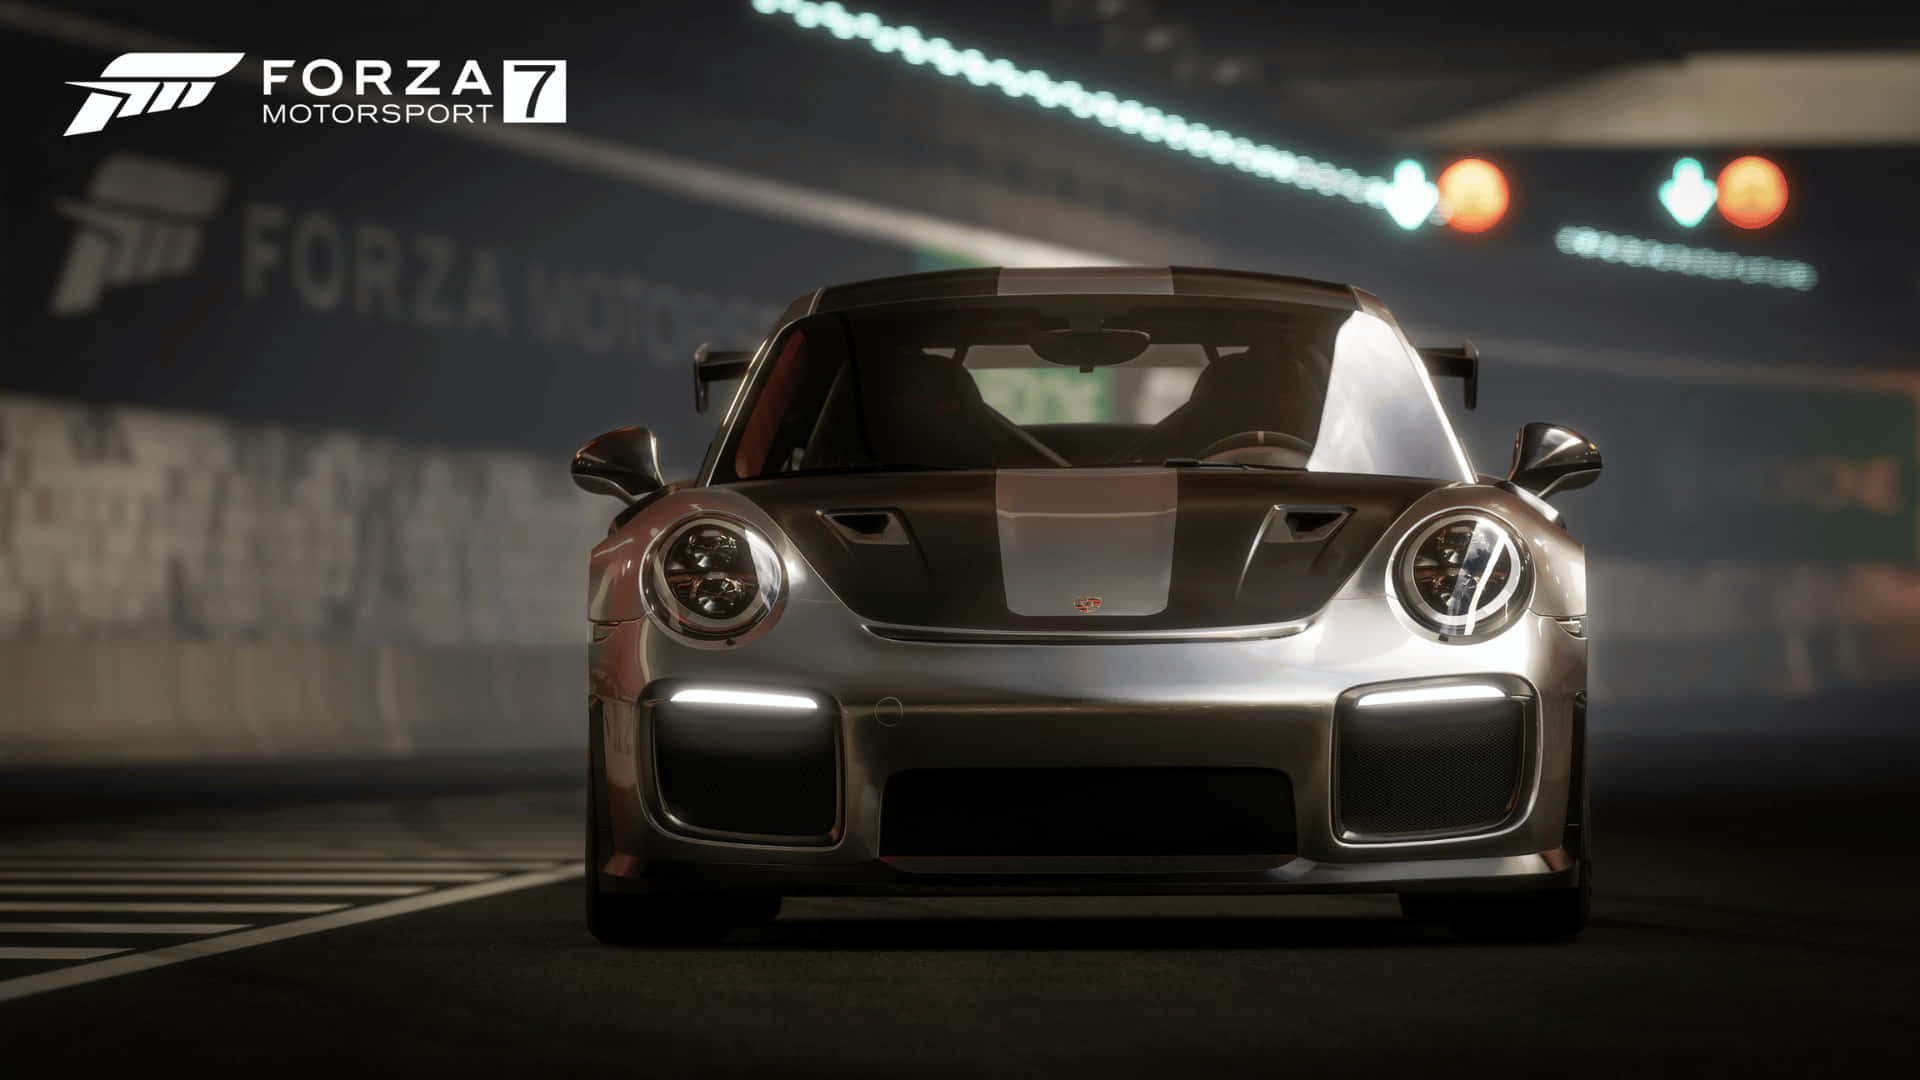 Image  Race Through the Streets of Forza Motorsport 7 in 1080p